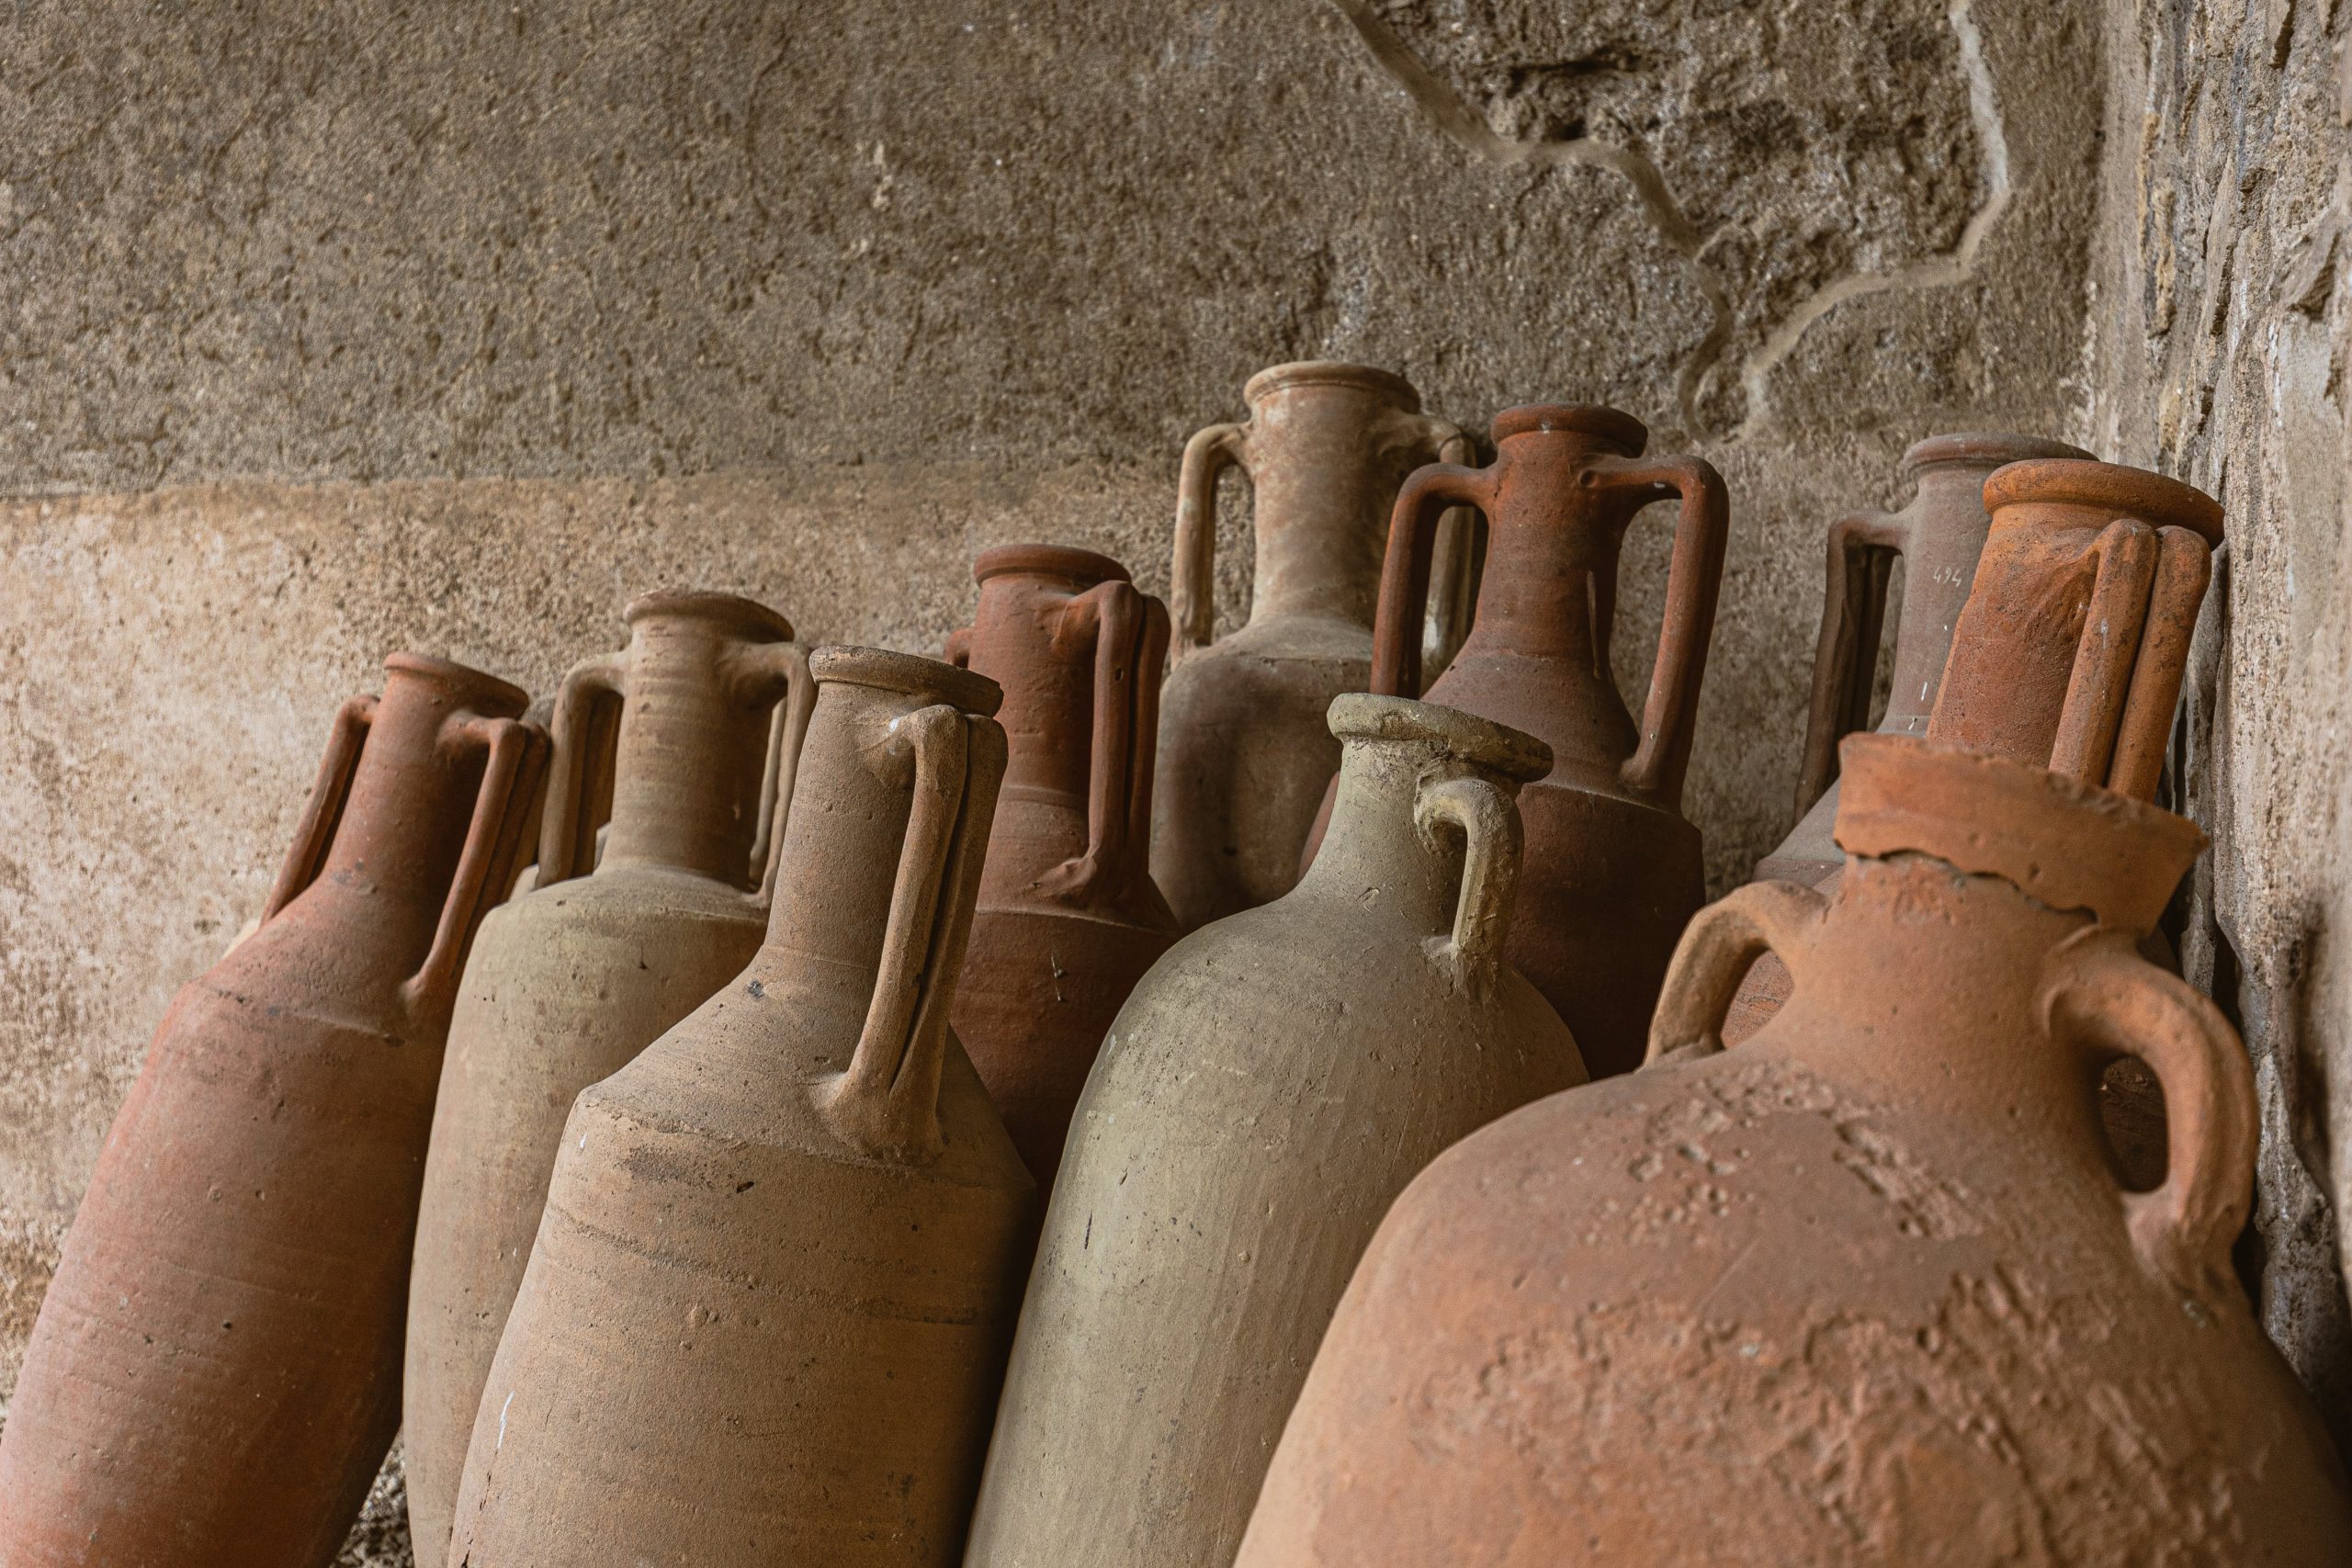 Barcelona ceramics: a group of amphorae leaning against an old wall